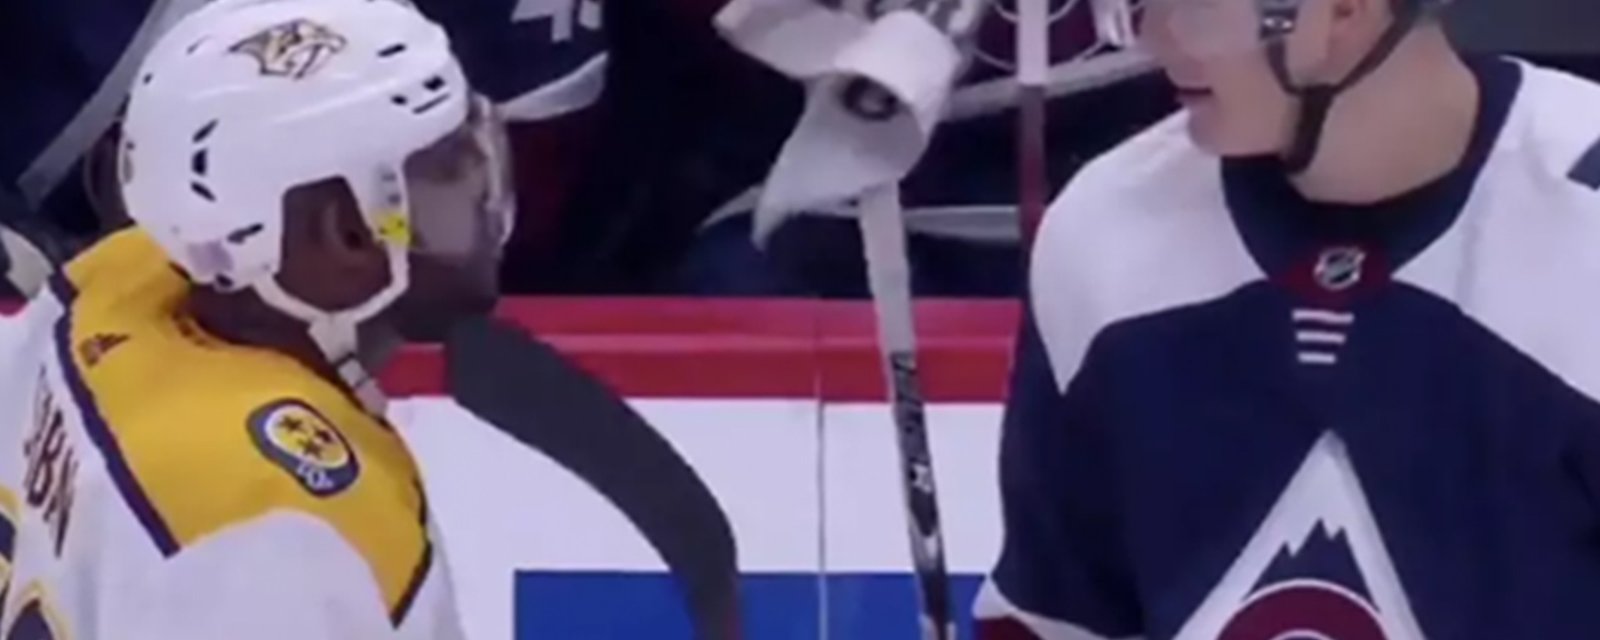 Mic’d Up: Subban and Zadorov get into EPIC chirp fest